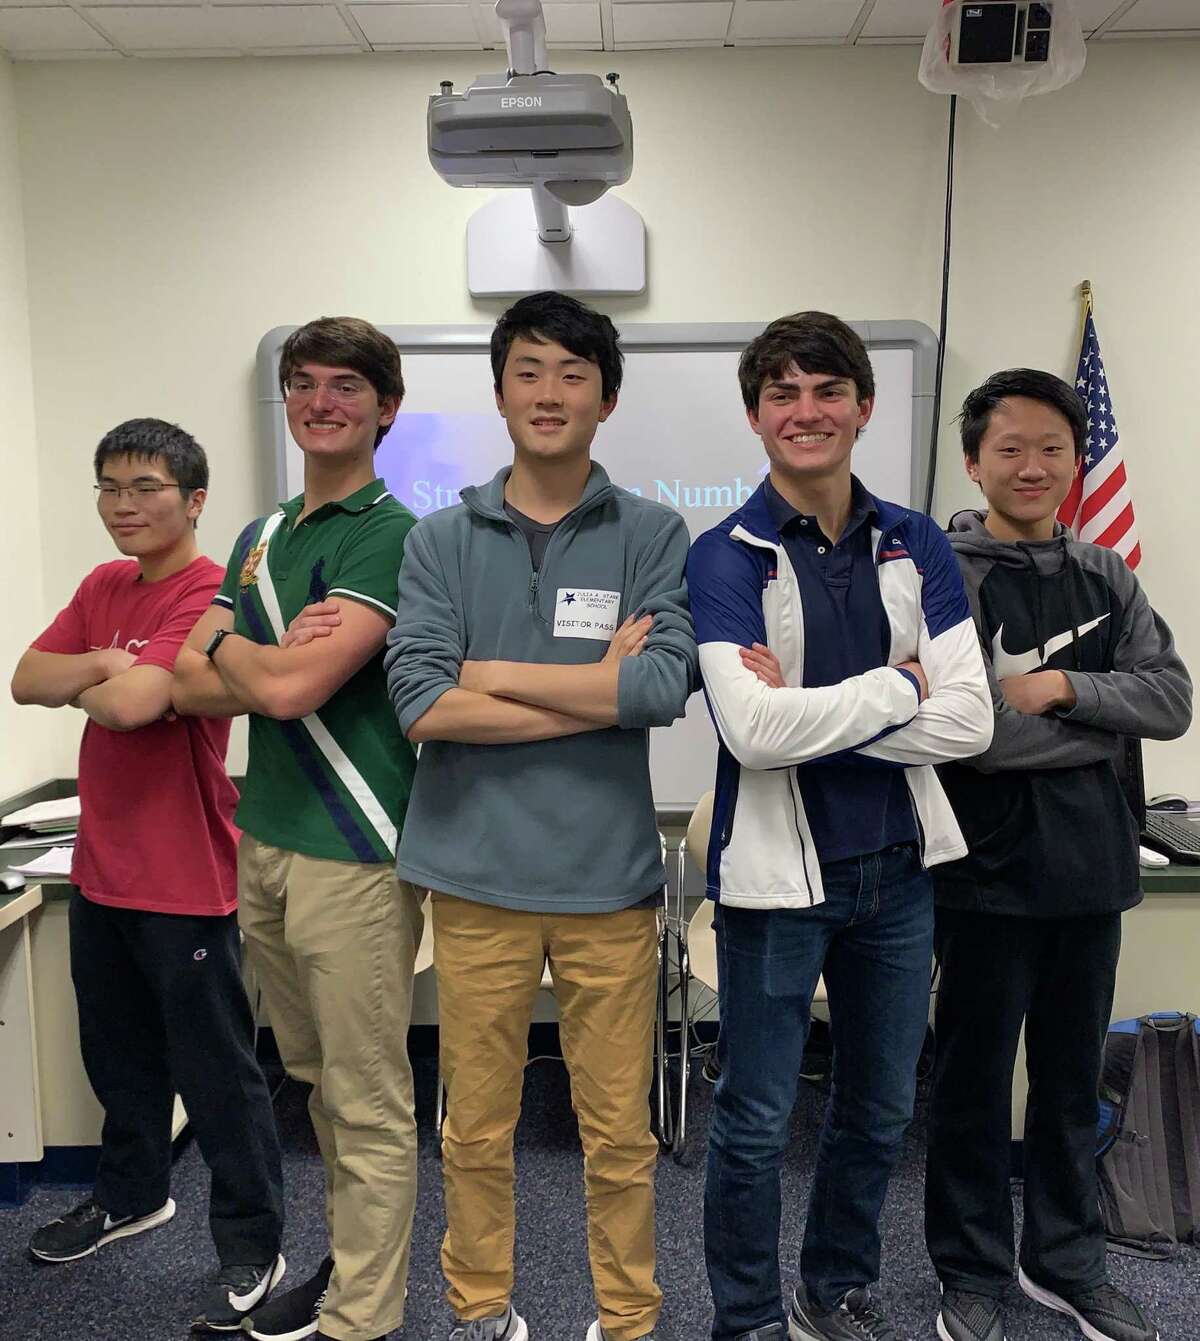 Marcus Feng, left, Jonathan Strong, Ming Wu, James Strong, Andrew Qin. Not pictured, Luke Smith. Darien High School seniors James Strong (president and co-founder) and Ming Wu (co-founder) have worked to bring fourth and fifth graders a program that pushes their minds while exciting them about the field of mathematics.